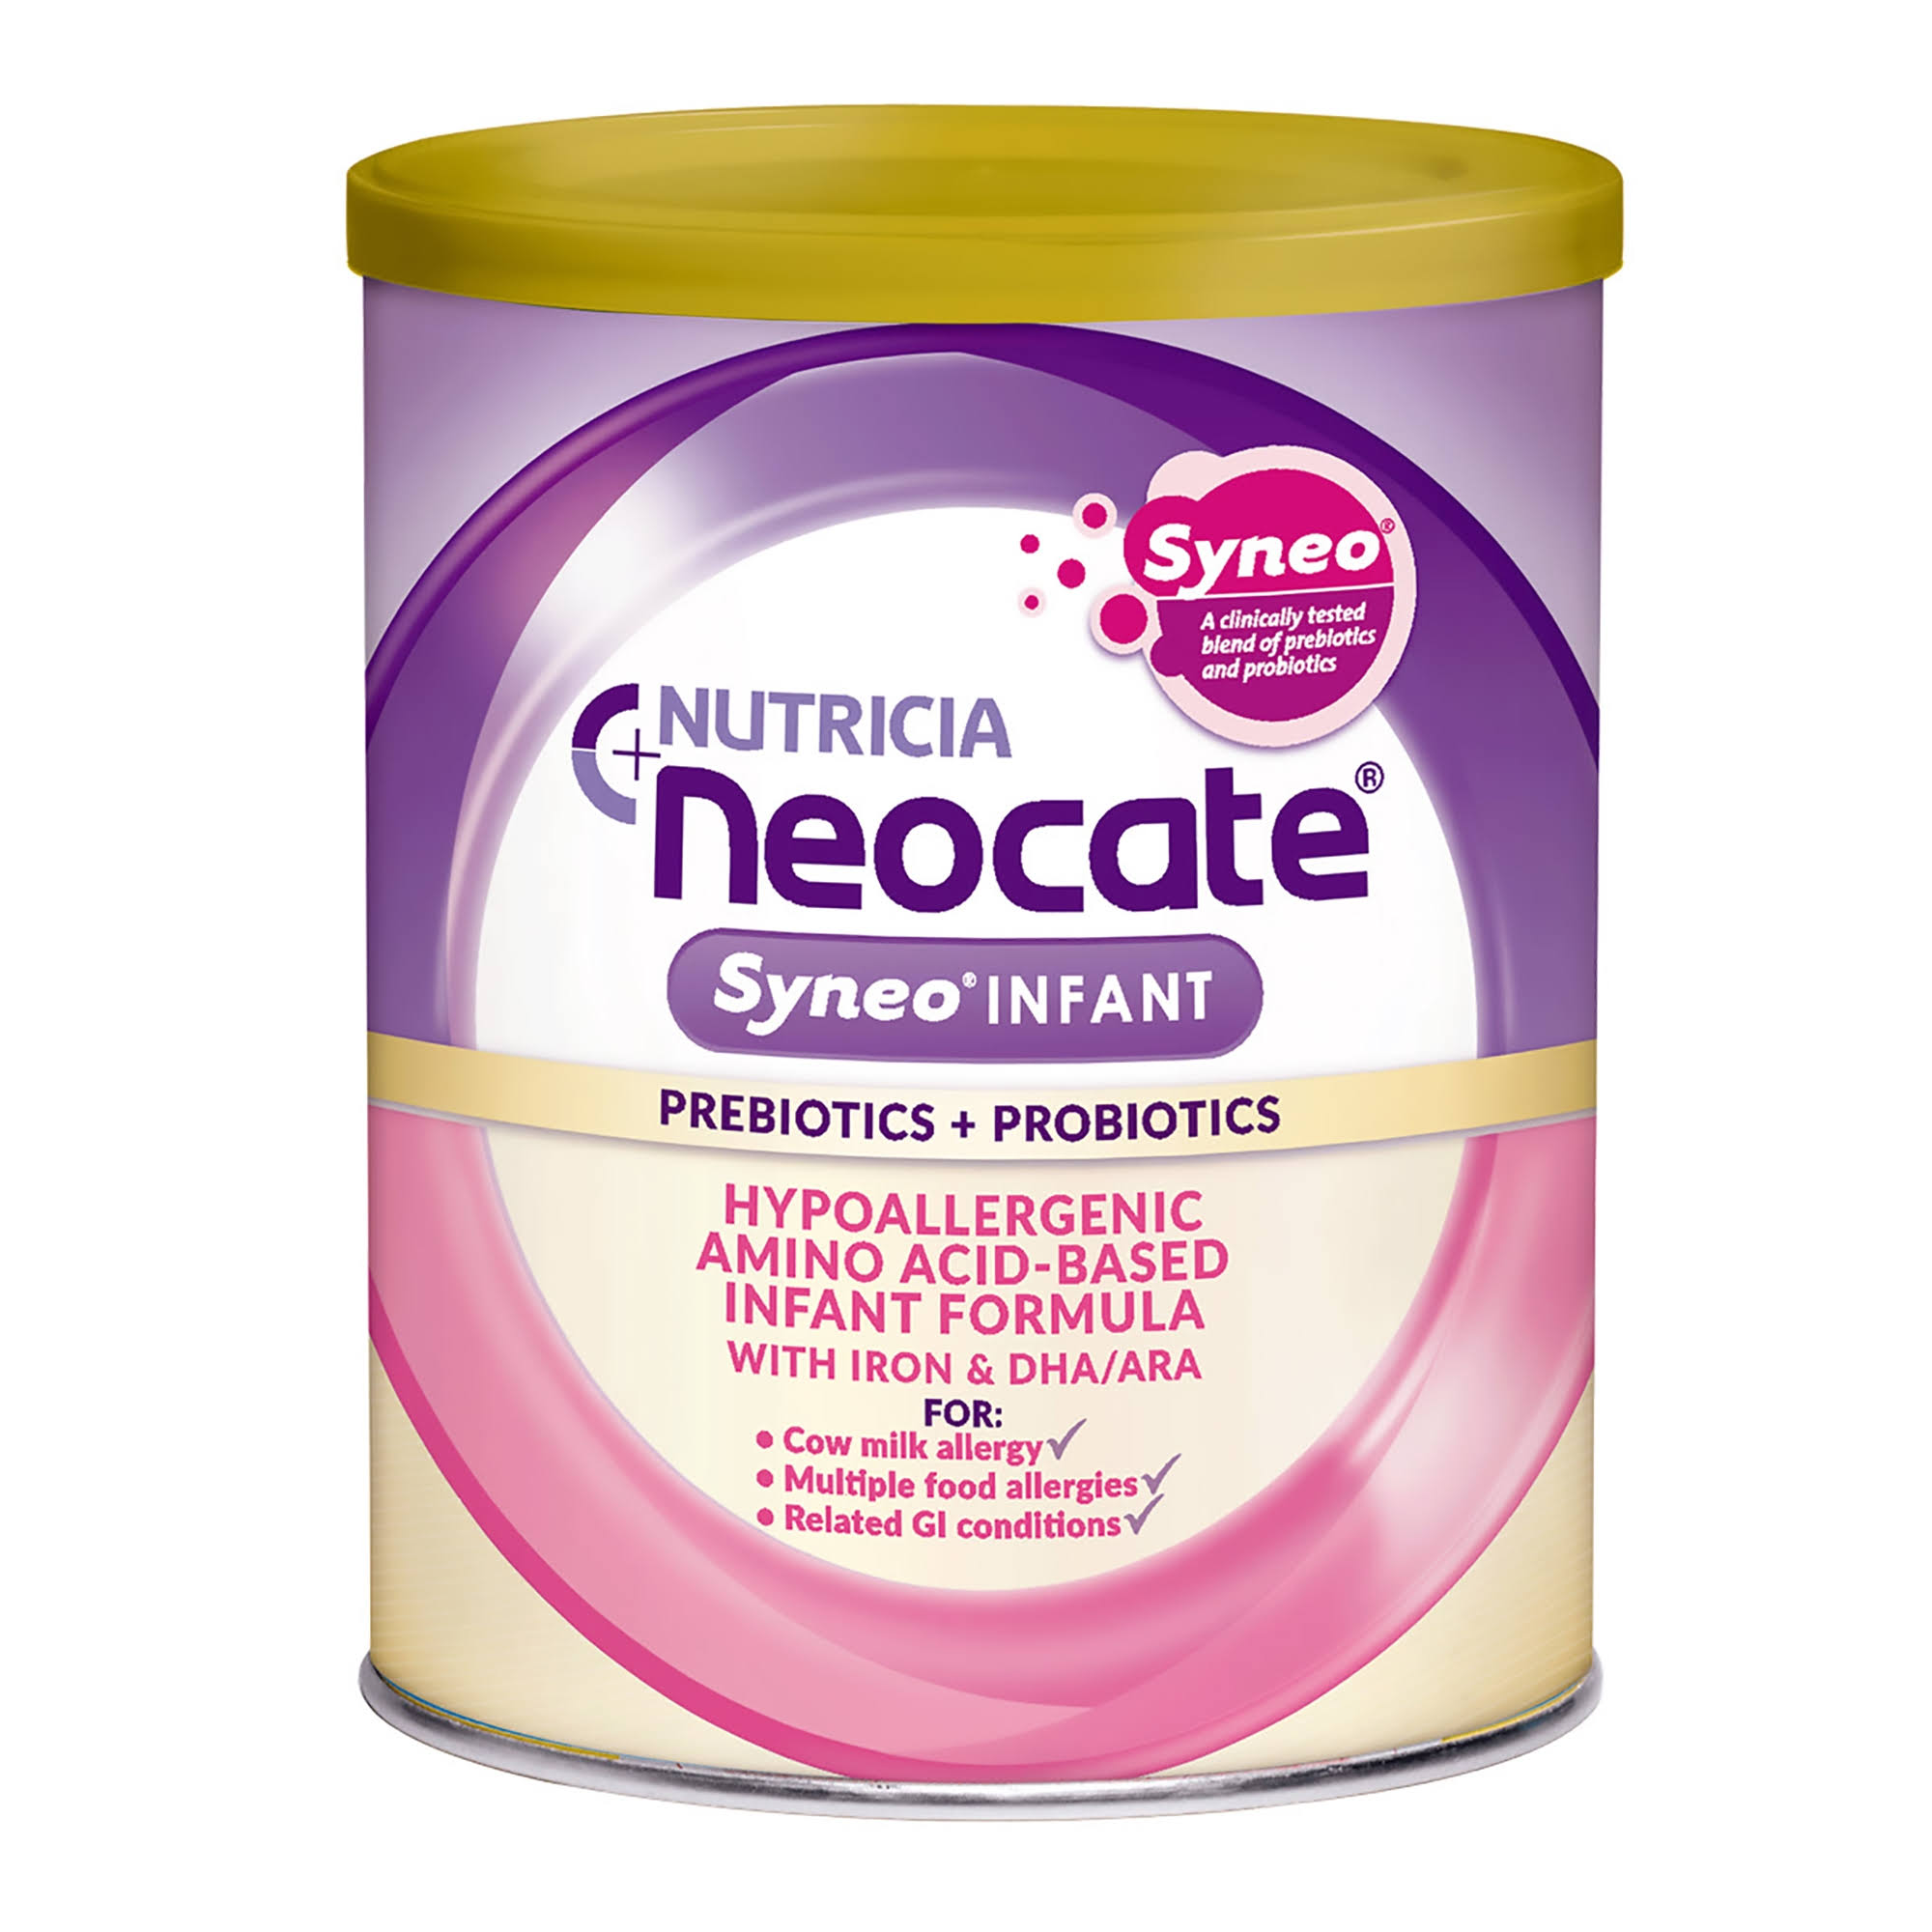 Neocate Syneo Infant - 14.1oz